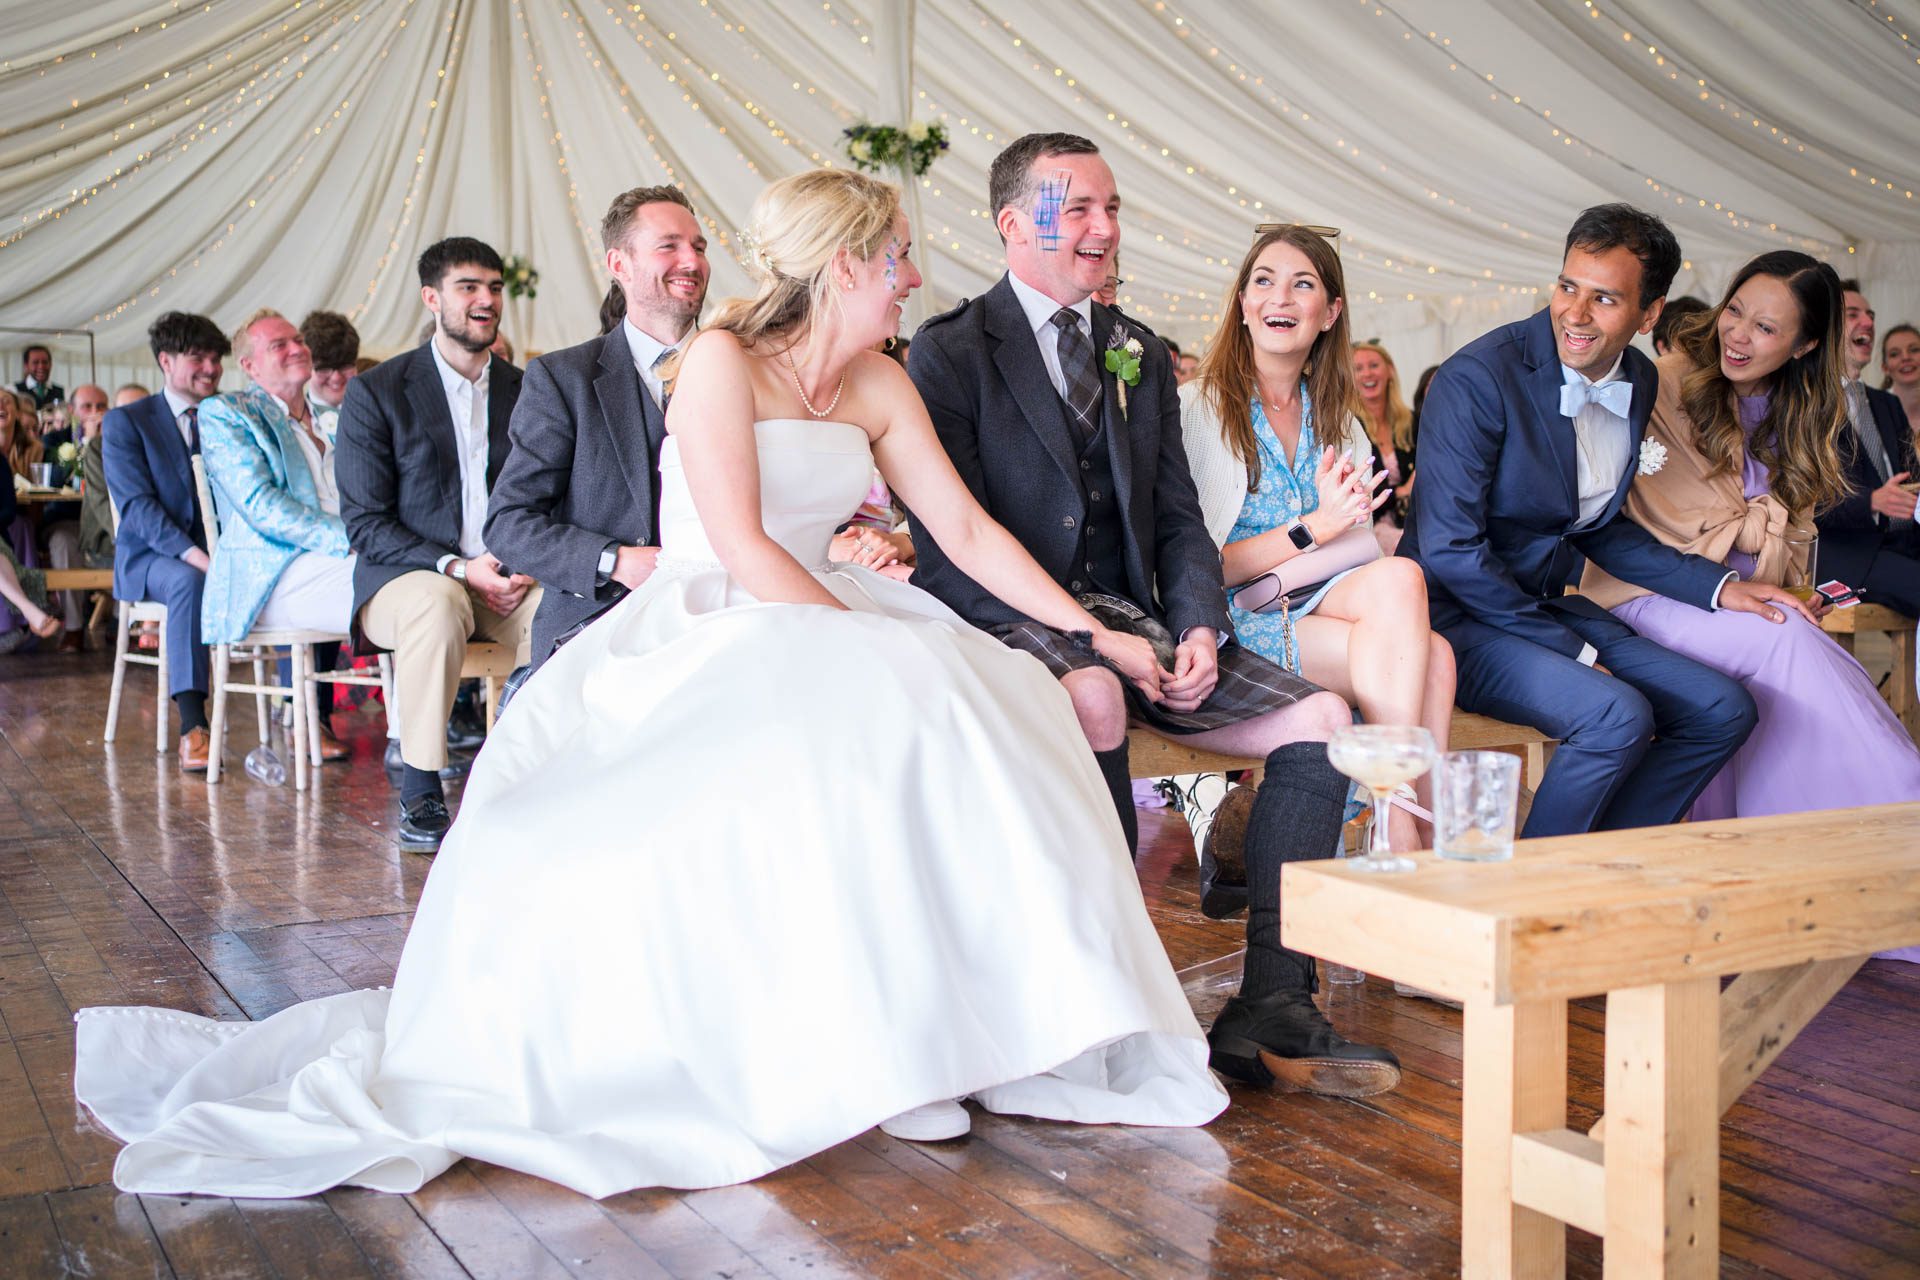 Groom and guests laughing at the best man's speech